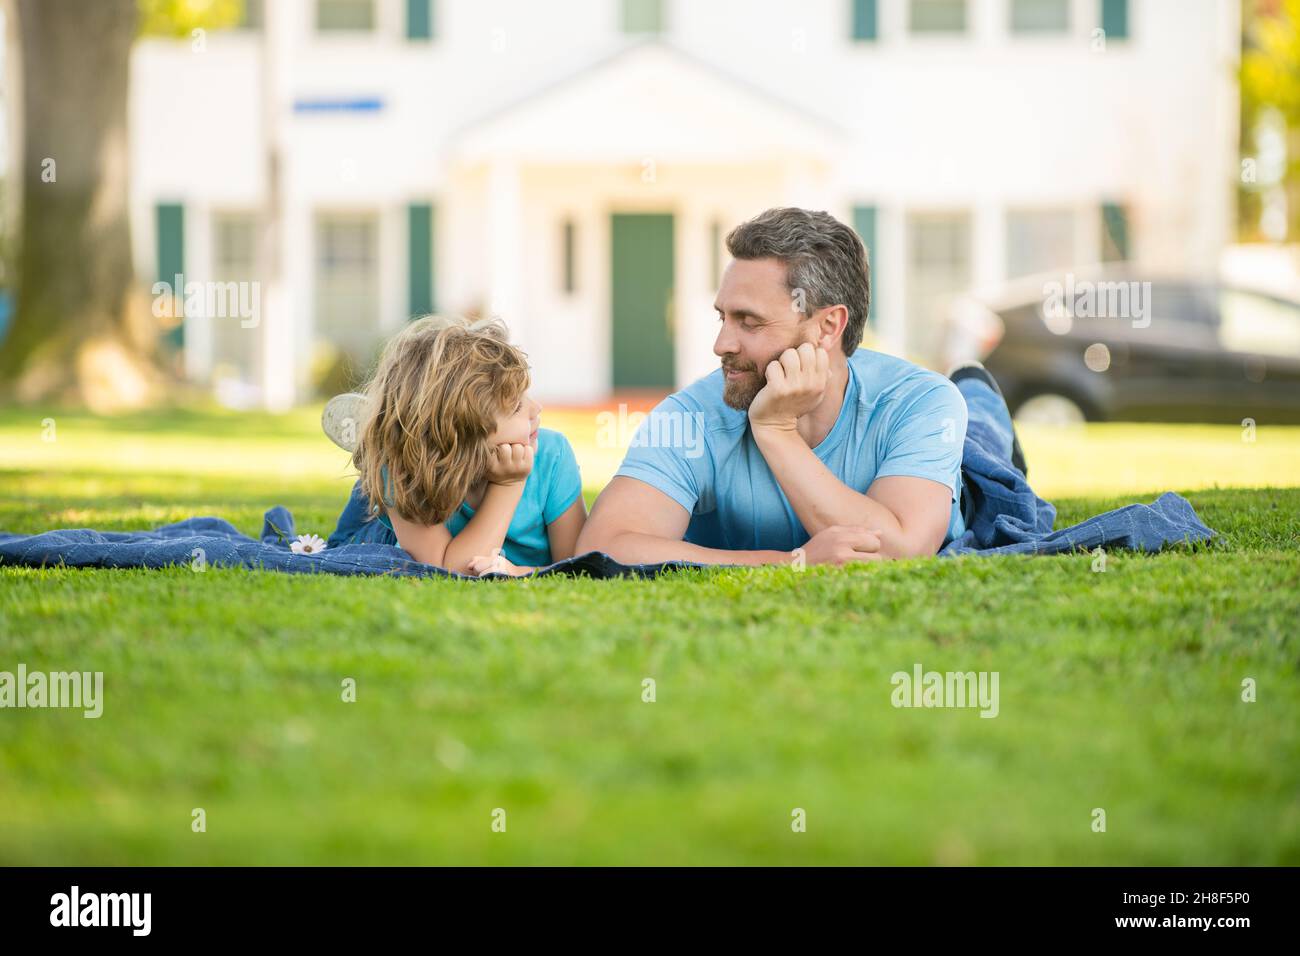 smiling father and son having fun in park. family value. childhood and parenthood. Stock Photo